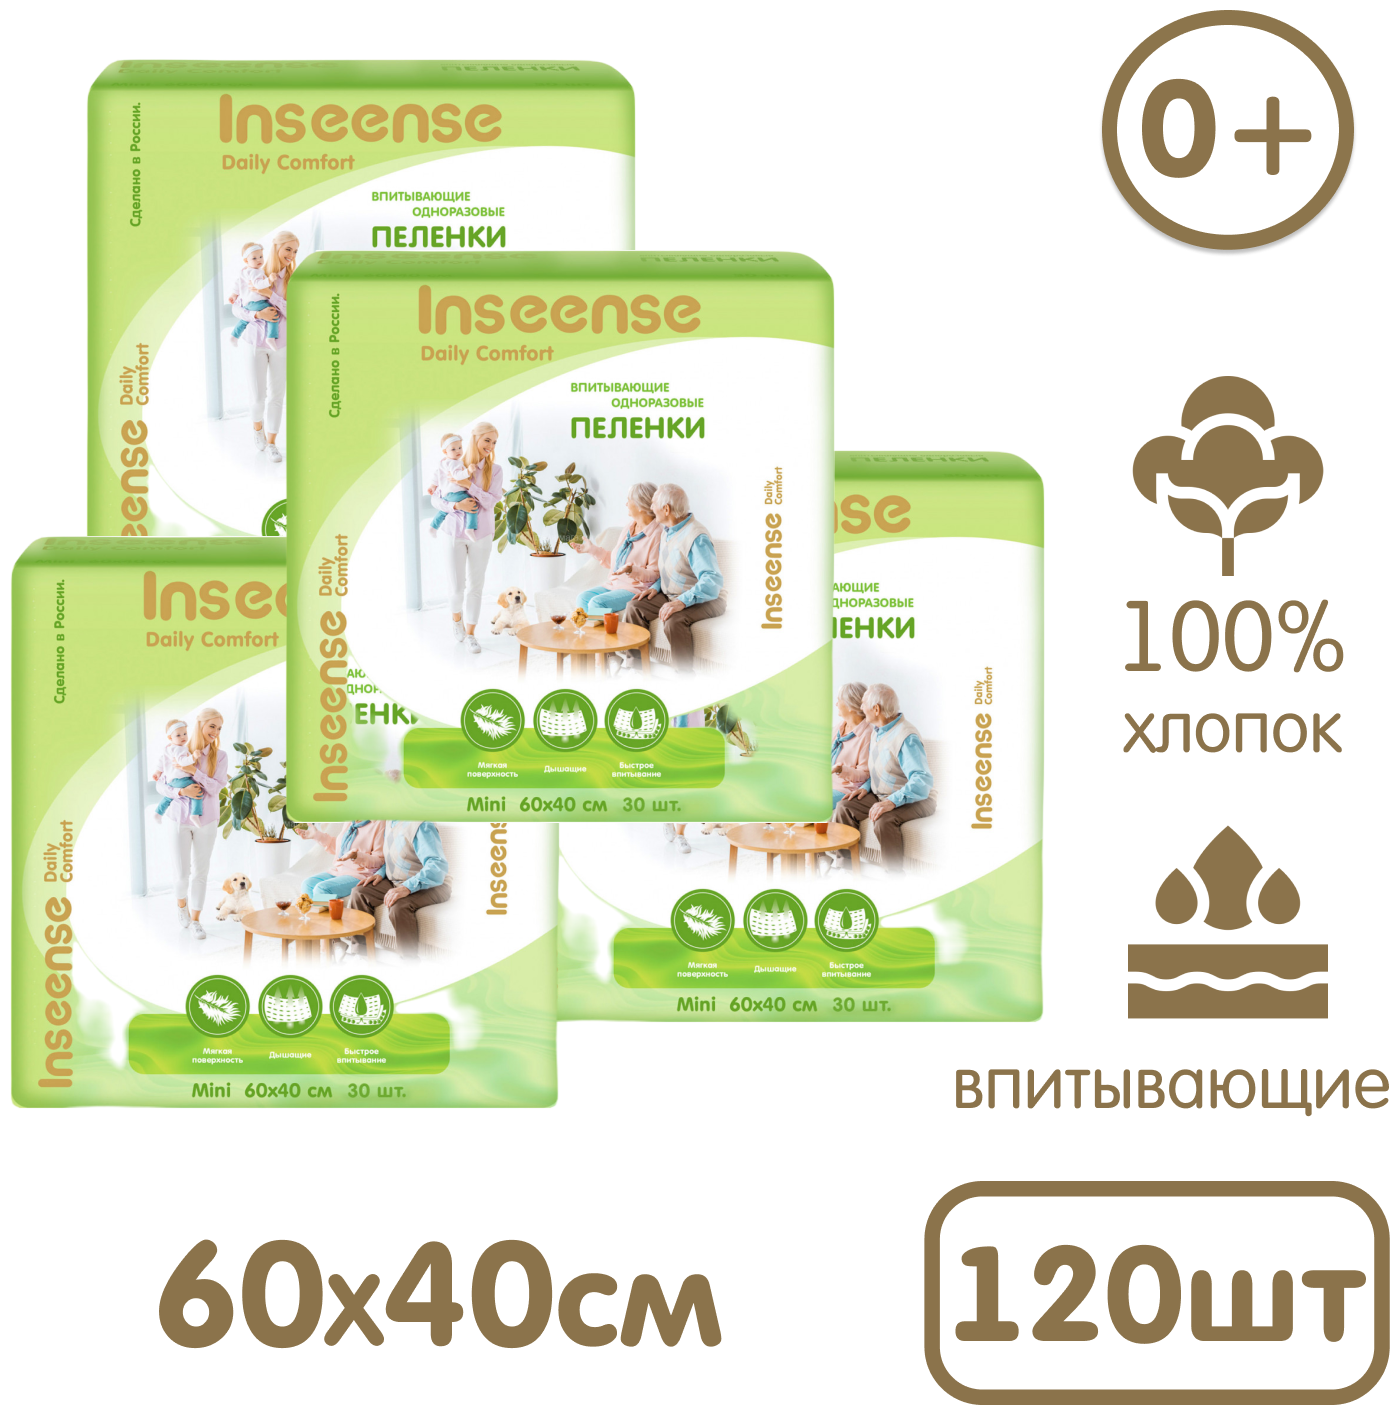   Inseense Daily Comfort 60  40  30   4 